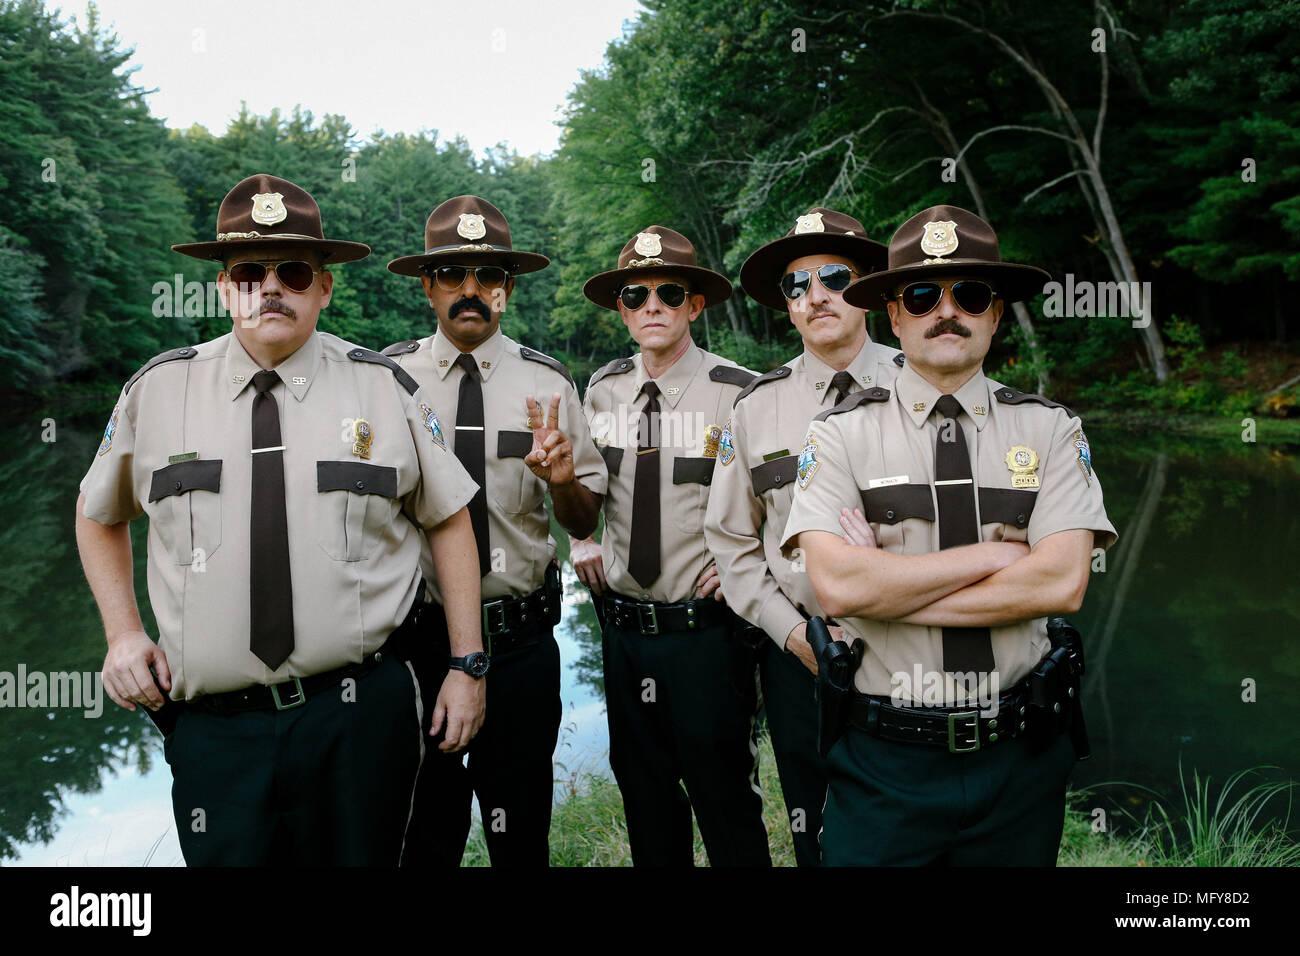 RELEASE DATE: April 20, 2018 TITLE: Super Troopers 2 STUDIO: Fox Searchlight Pictures DIRECTOR: Jay Chandrasekhar PLOT: When a border dispute arises between the U.S. and Canada, the Super Troopers are tasked with establishing a Highway Patrol station in the disputed area. STARRING: Jay Chandrasekhar, Steve Lemme, Erik Stolhanske, Paul Soter, Kevin Hefferman. (Credit Image: © Fox Searchlight Pictures/Entertainment Pictures) Stock Photo